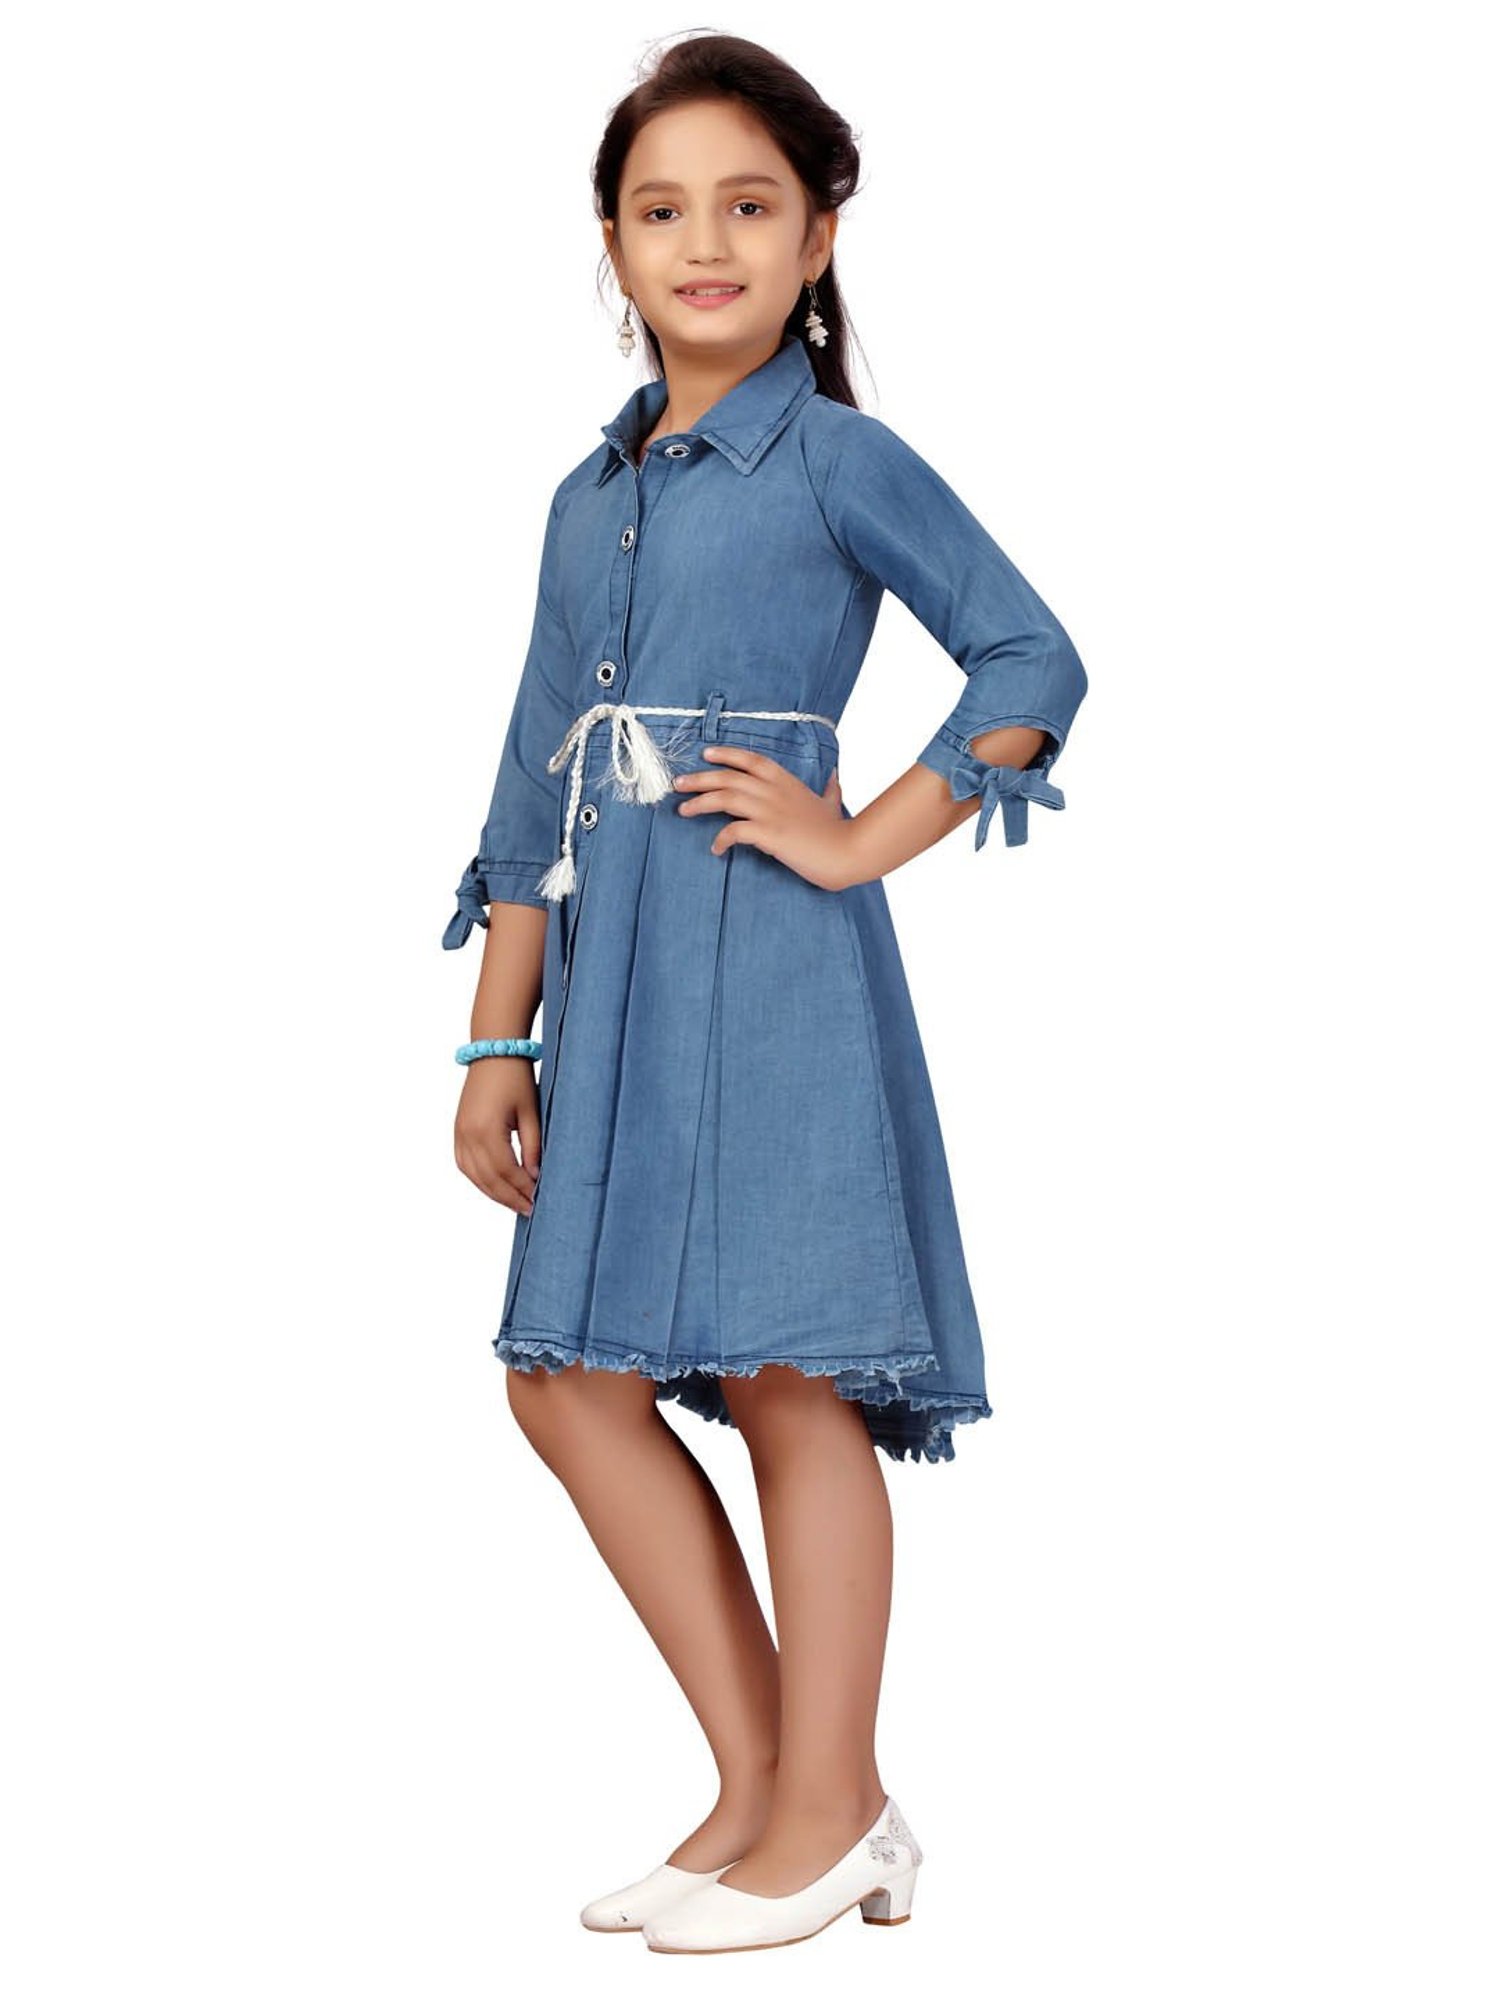 Girls Clothing | Denim Frock For 2-4 Years Baby Girl | Freeup